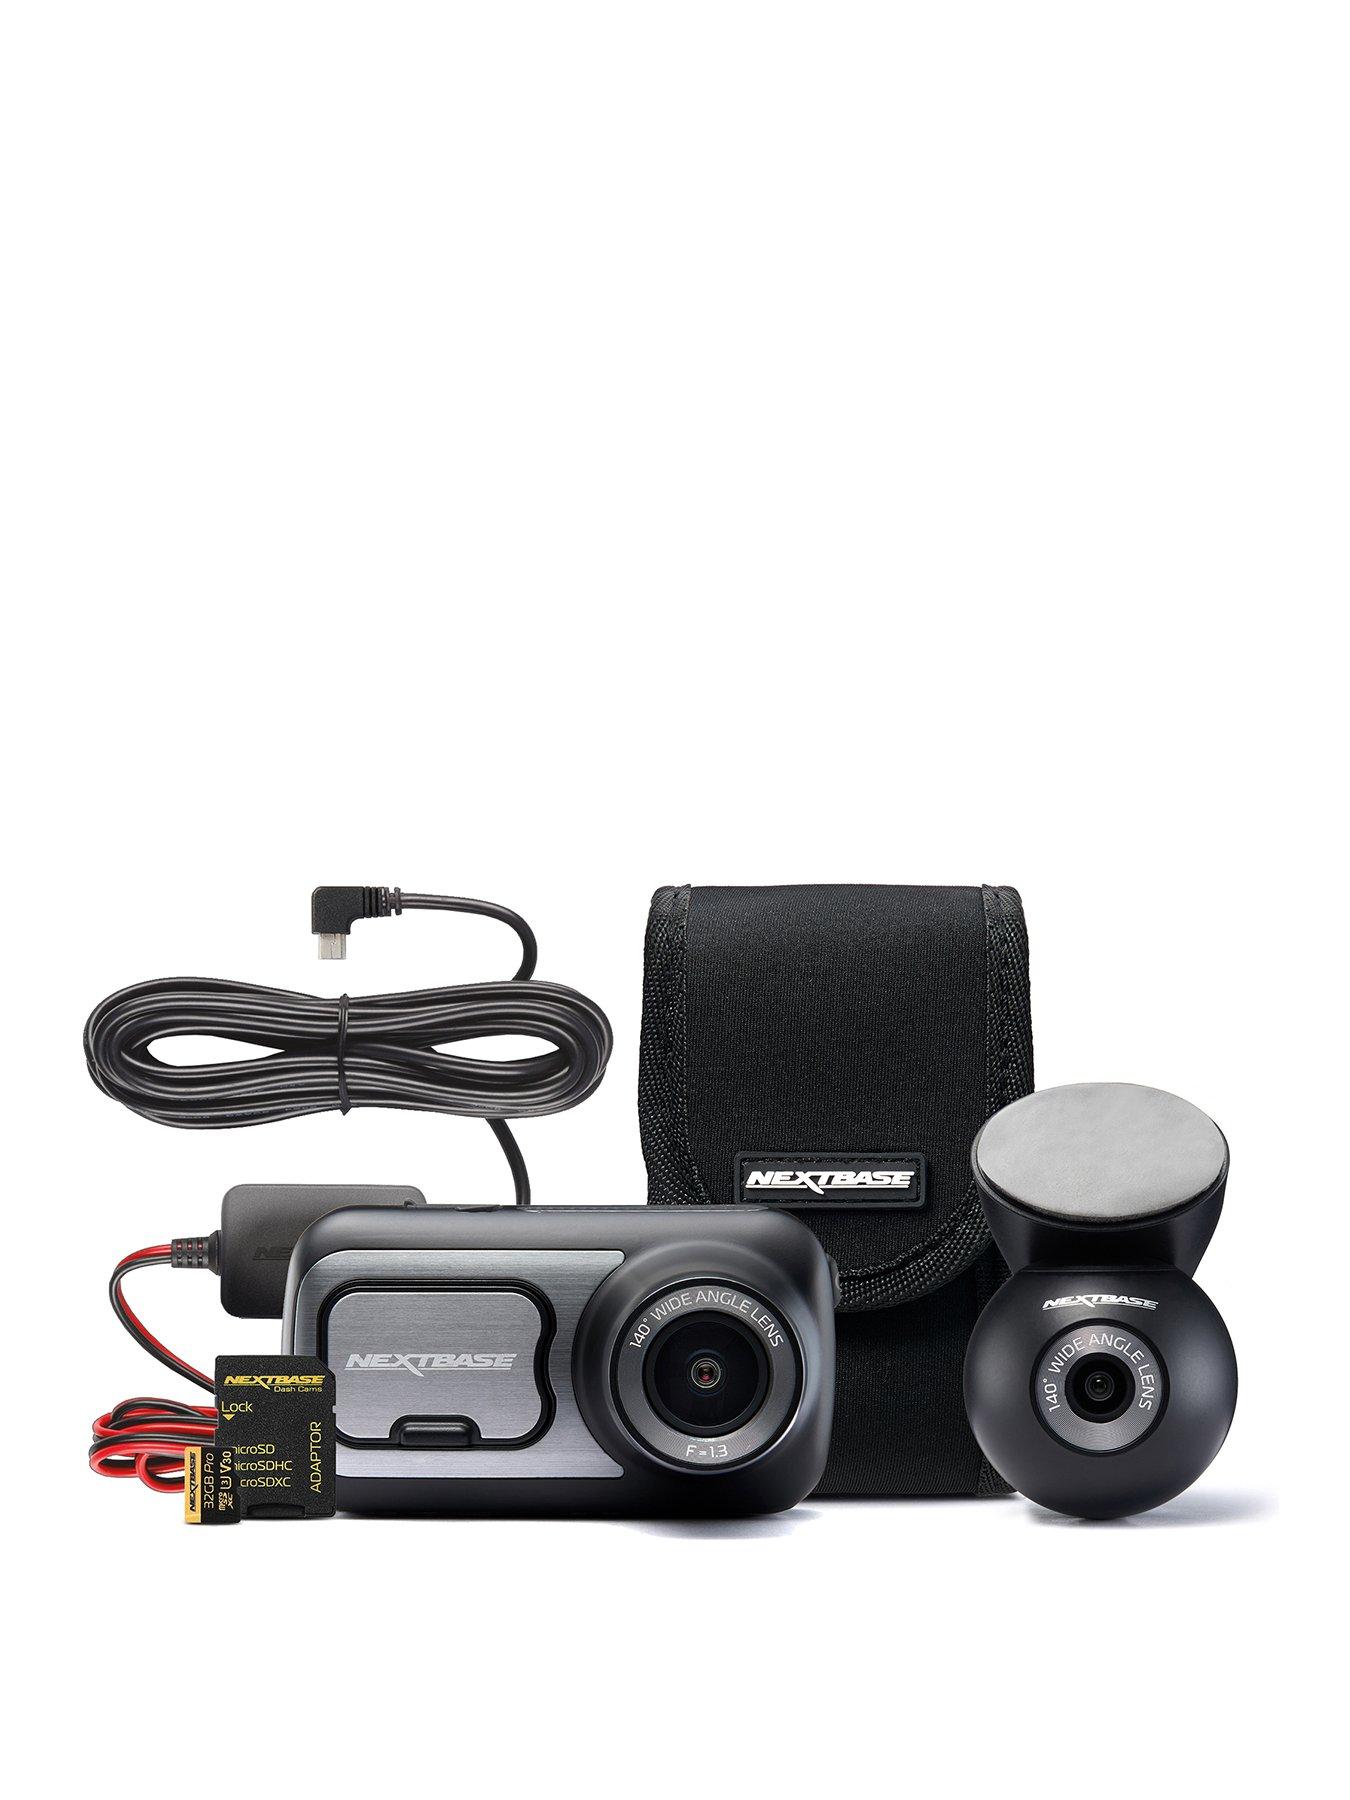 https://media.littlewoods.com/i/littlewoods/PHEEG_SQ1_0000000099_N_A_SLf/nextbase-422-dash-cam-exclusive-bundle-with-rear-camera-32gb-memory-card-and-carry-case.jpg?$180x240_retinamobilex2$&$roundel_littlewoods$&p3_img=video_roundel